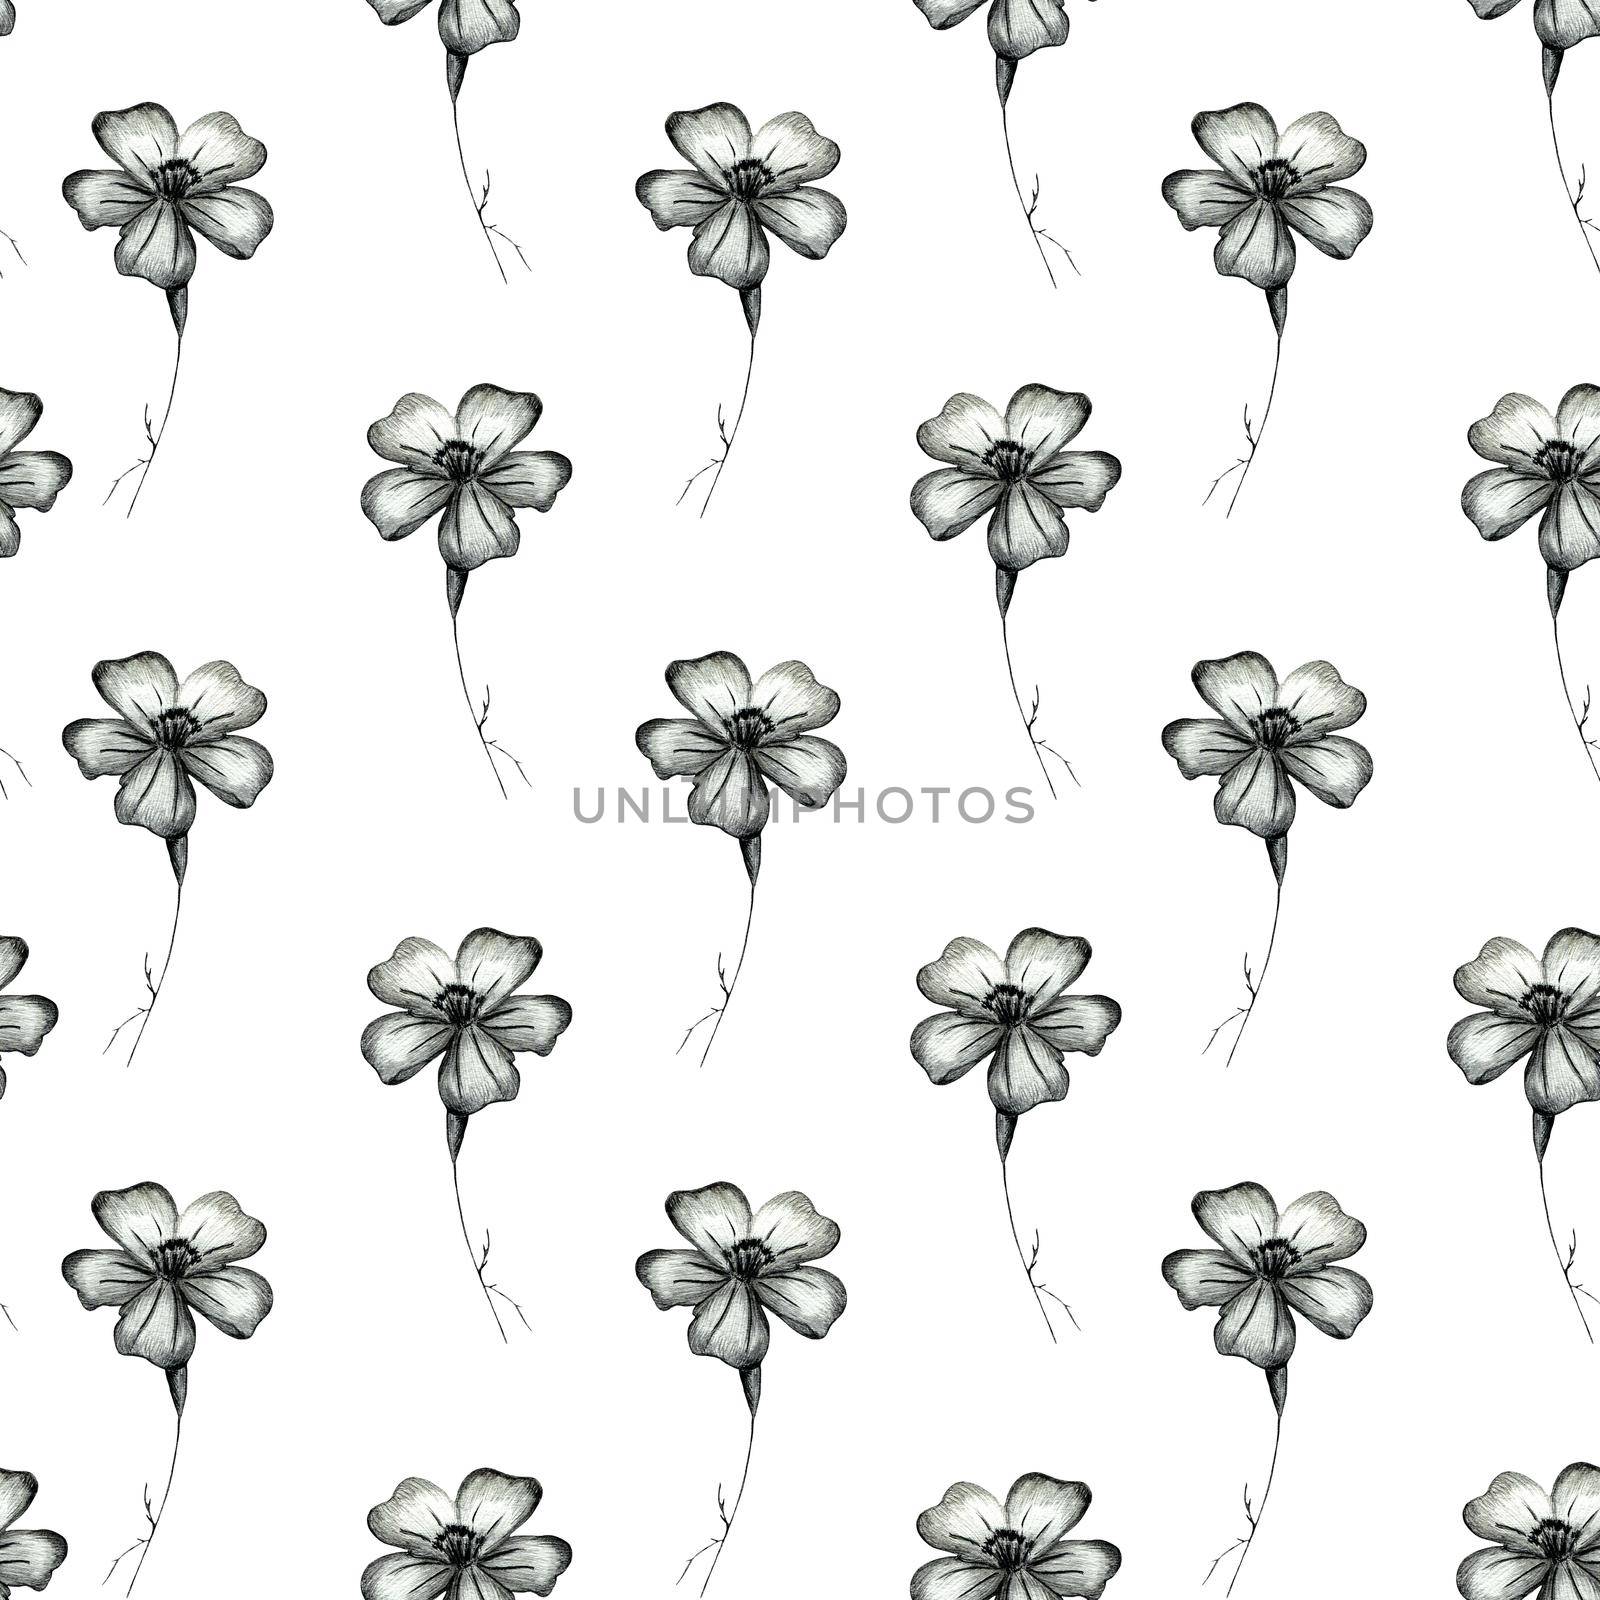 Seamless Pattern with Hand-Drawn Flower. Black Background with Thin-leaved Marigolds for Print, Design, Holiday, Wedding and Birthday Card.